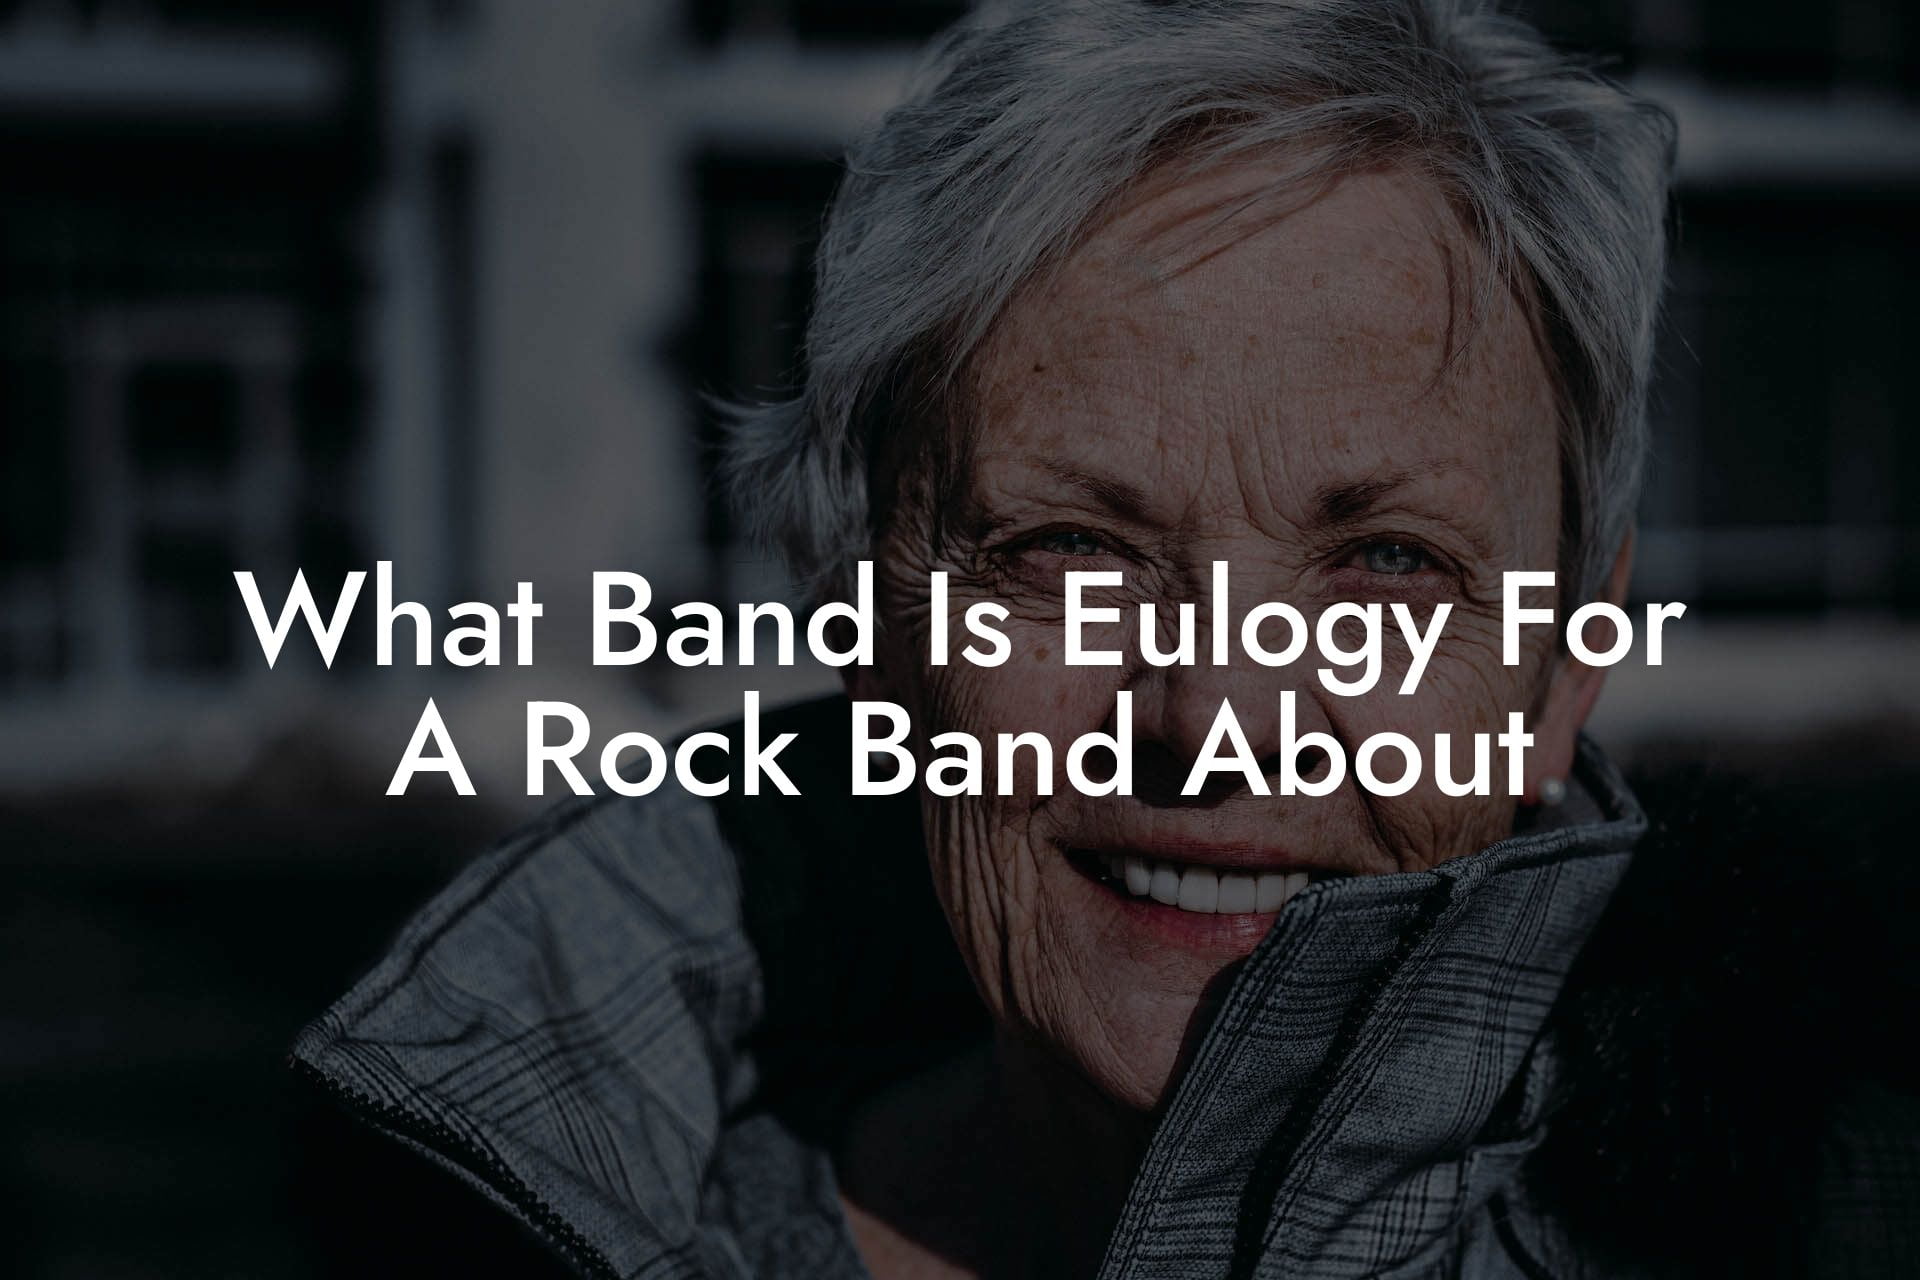 What Band Is Eulogy For A Rock Band About